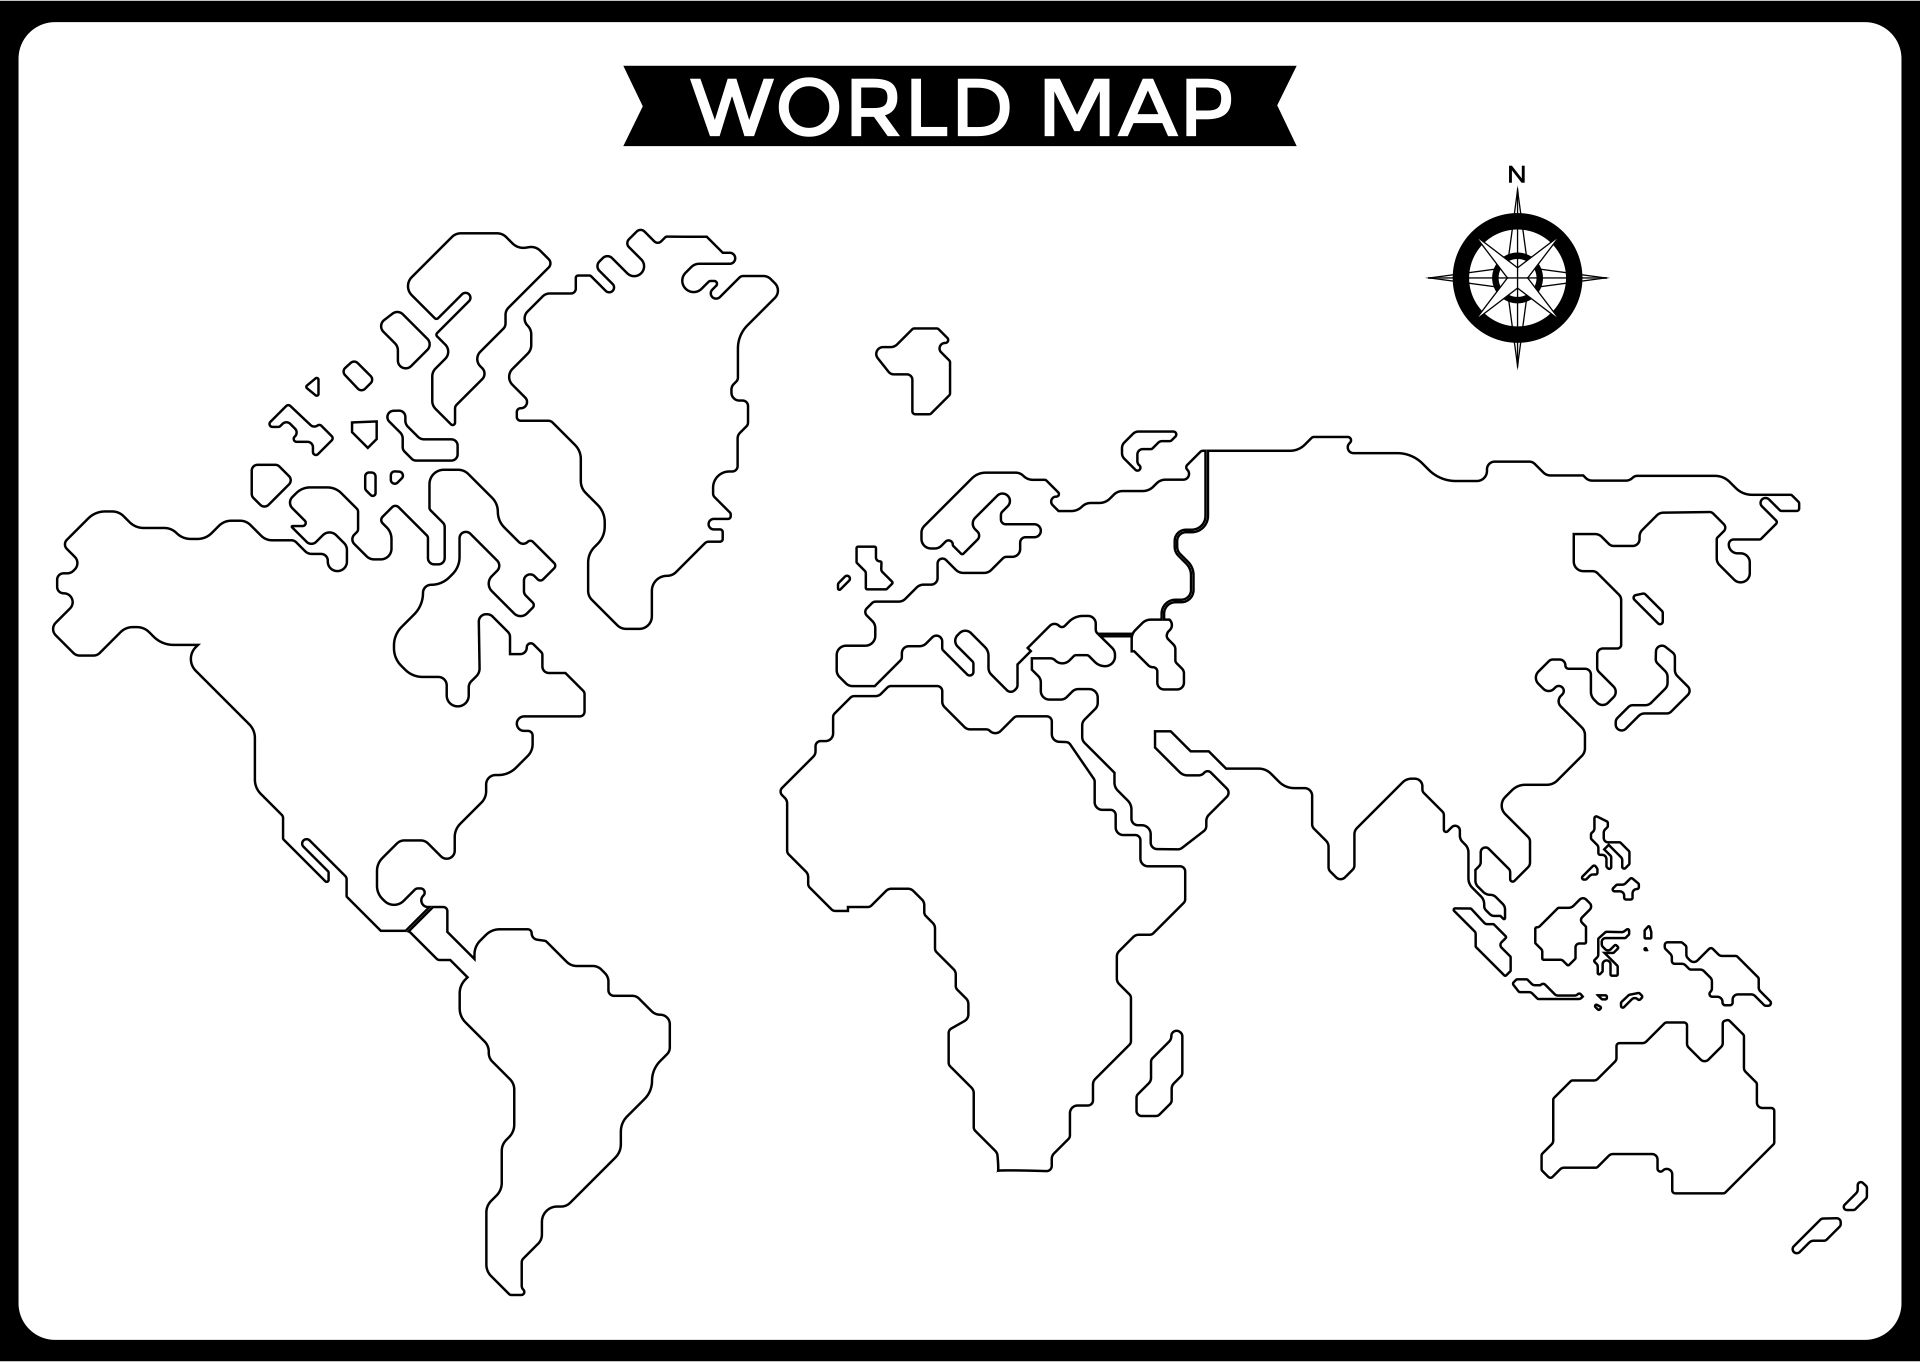 7 Best Images of World Map Printable A4 Size World Map Printable